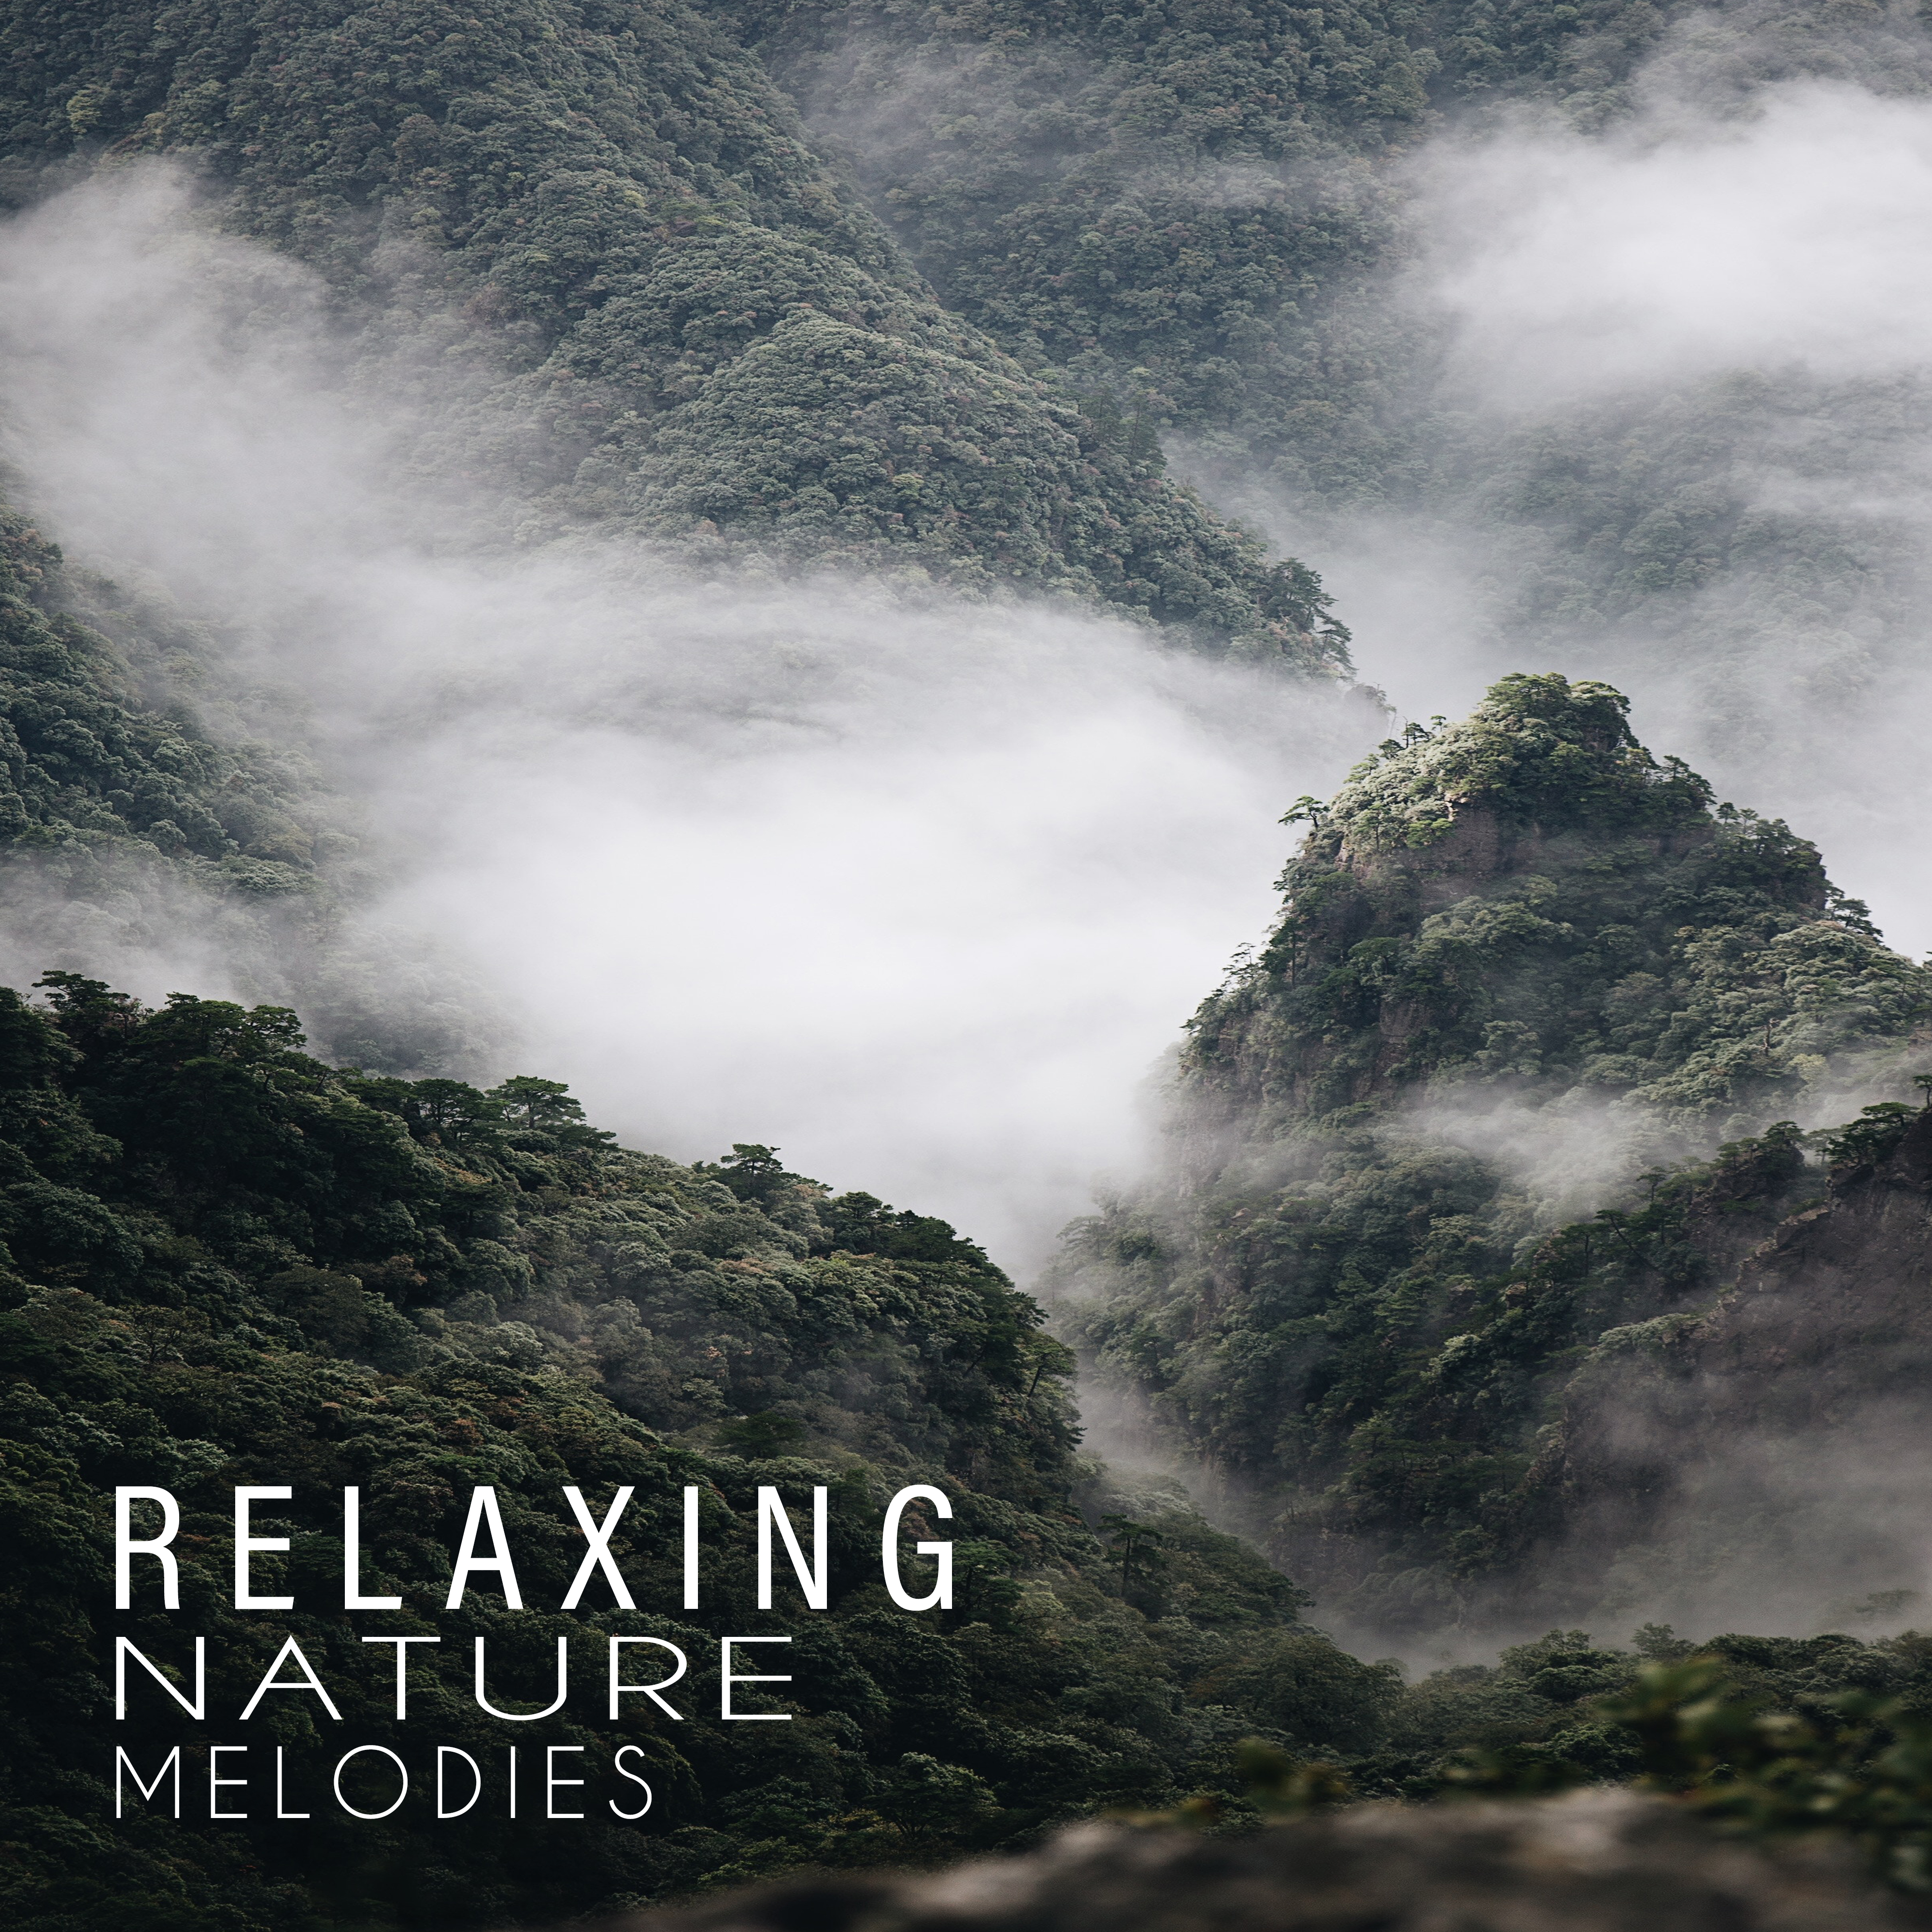 Nature Sounds Relaxation